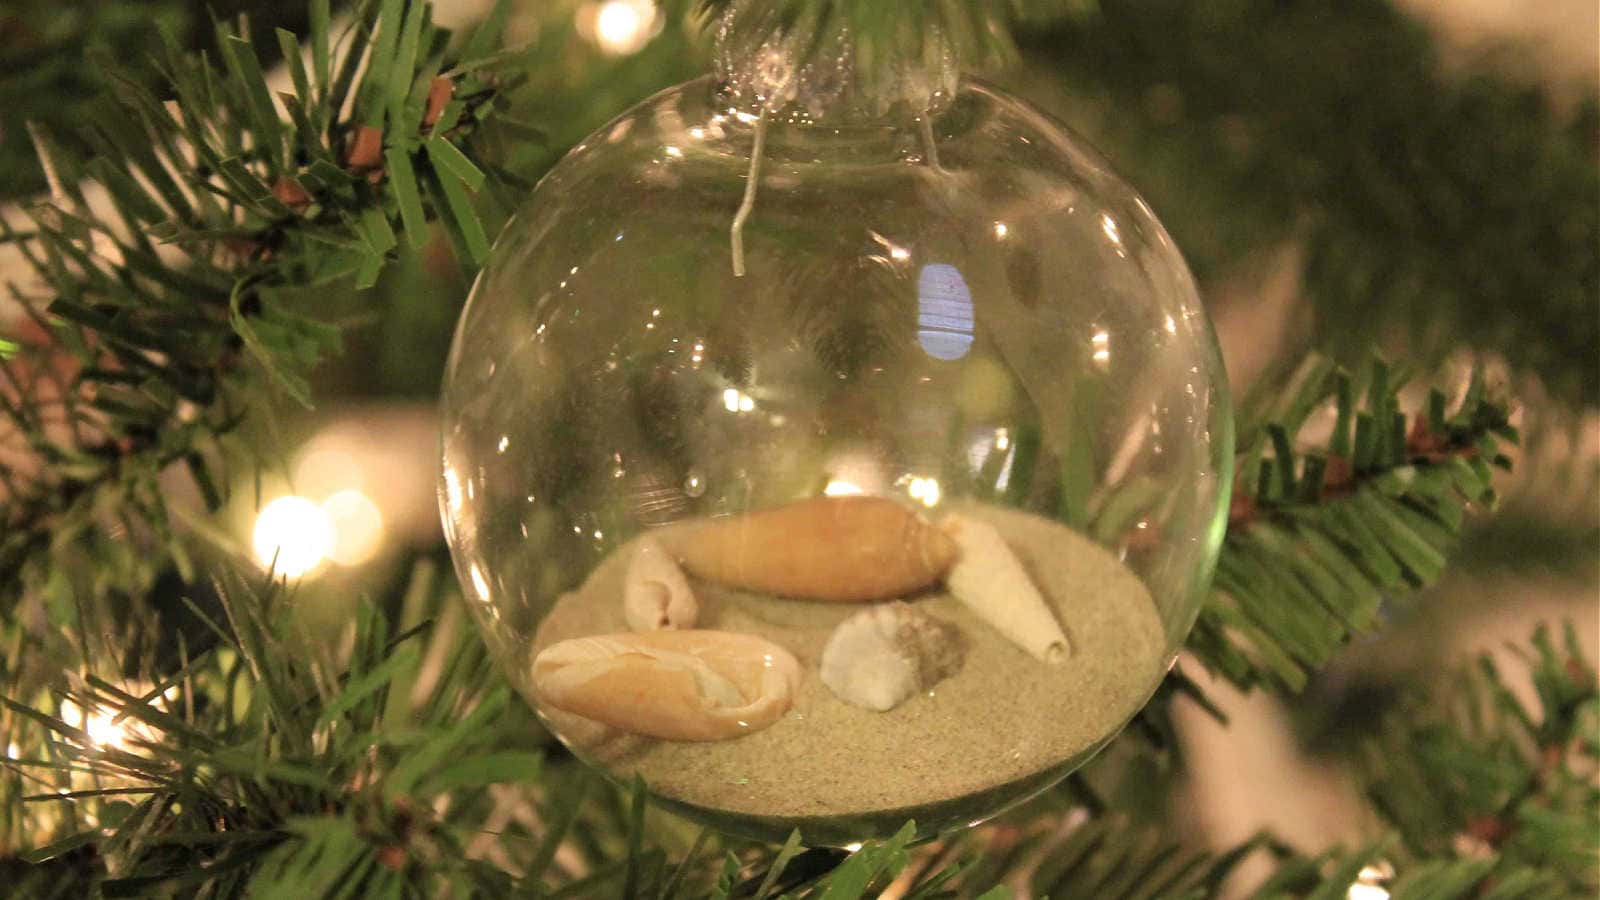 adding sand and shells to an ornament